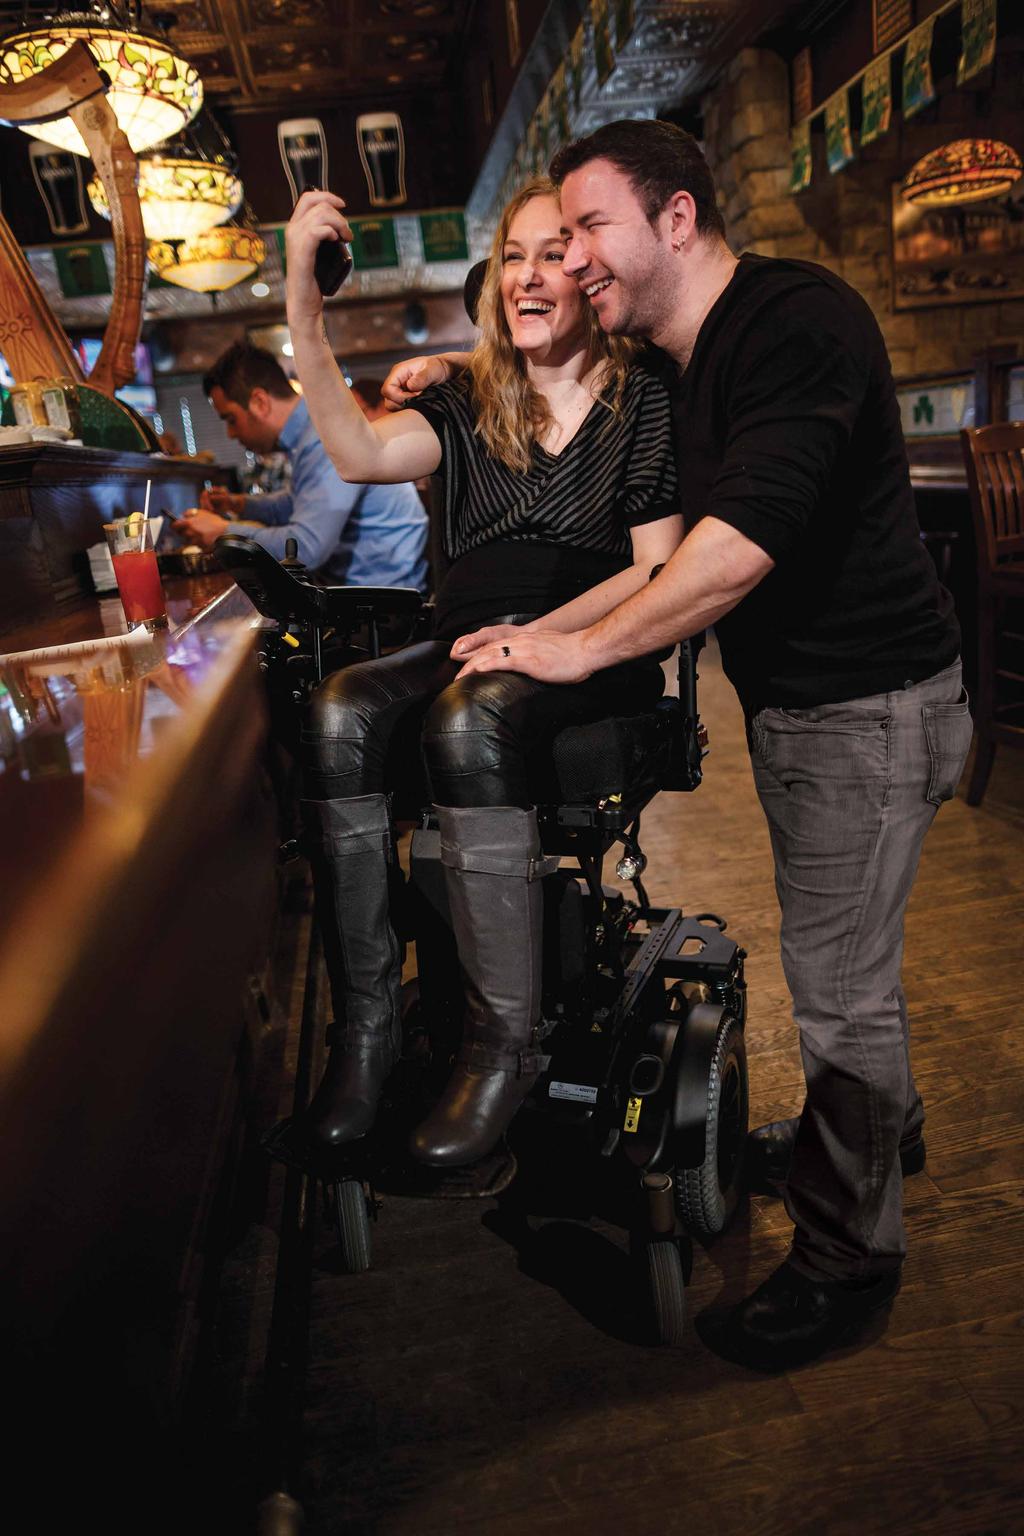 The Quickie Power X series is a family of Made in Canada power wheelchairs providing